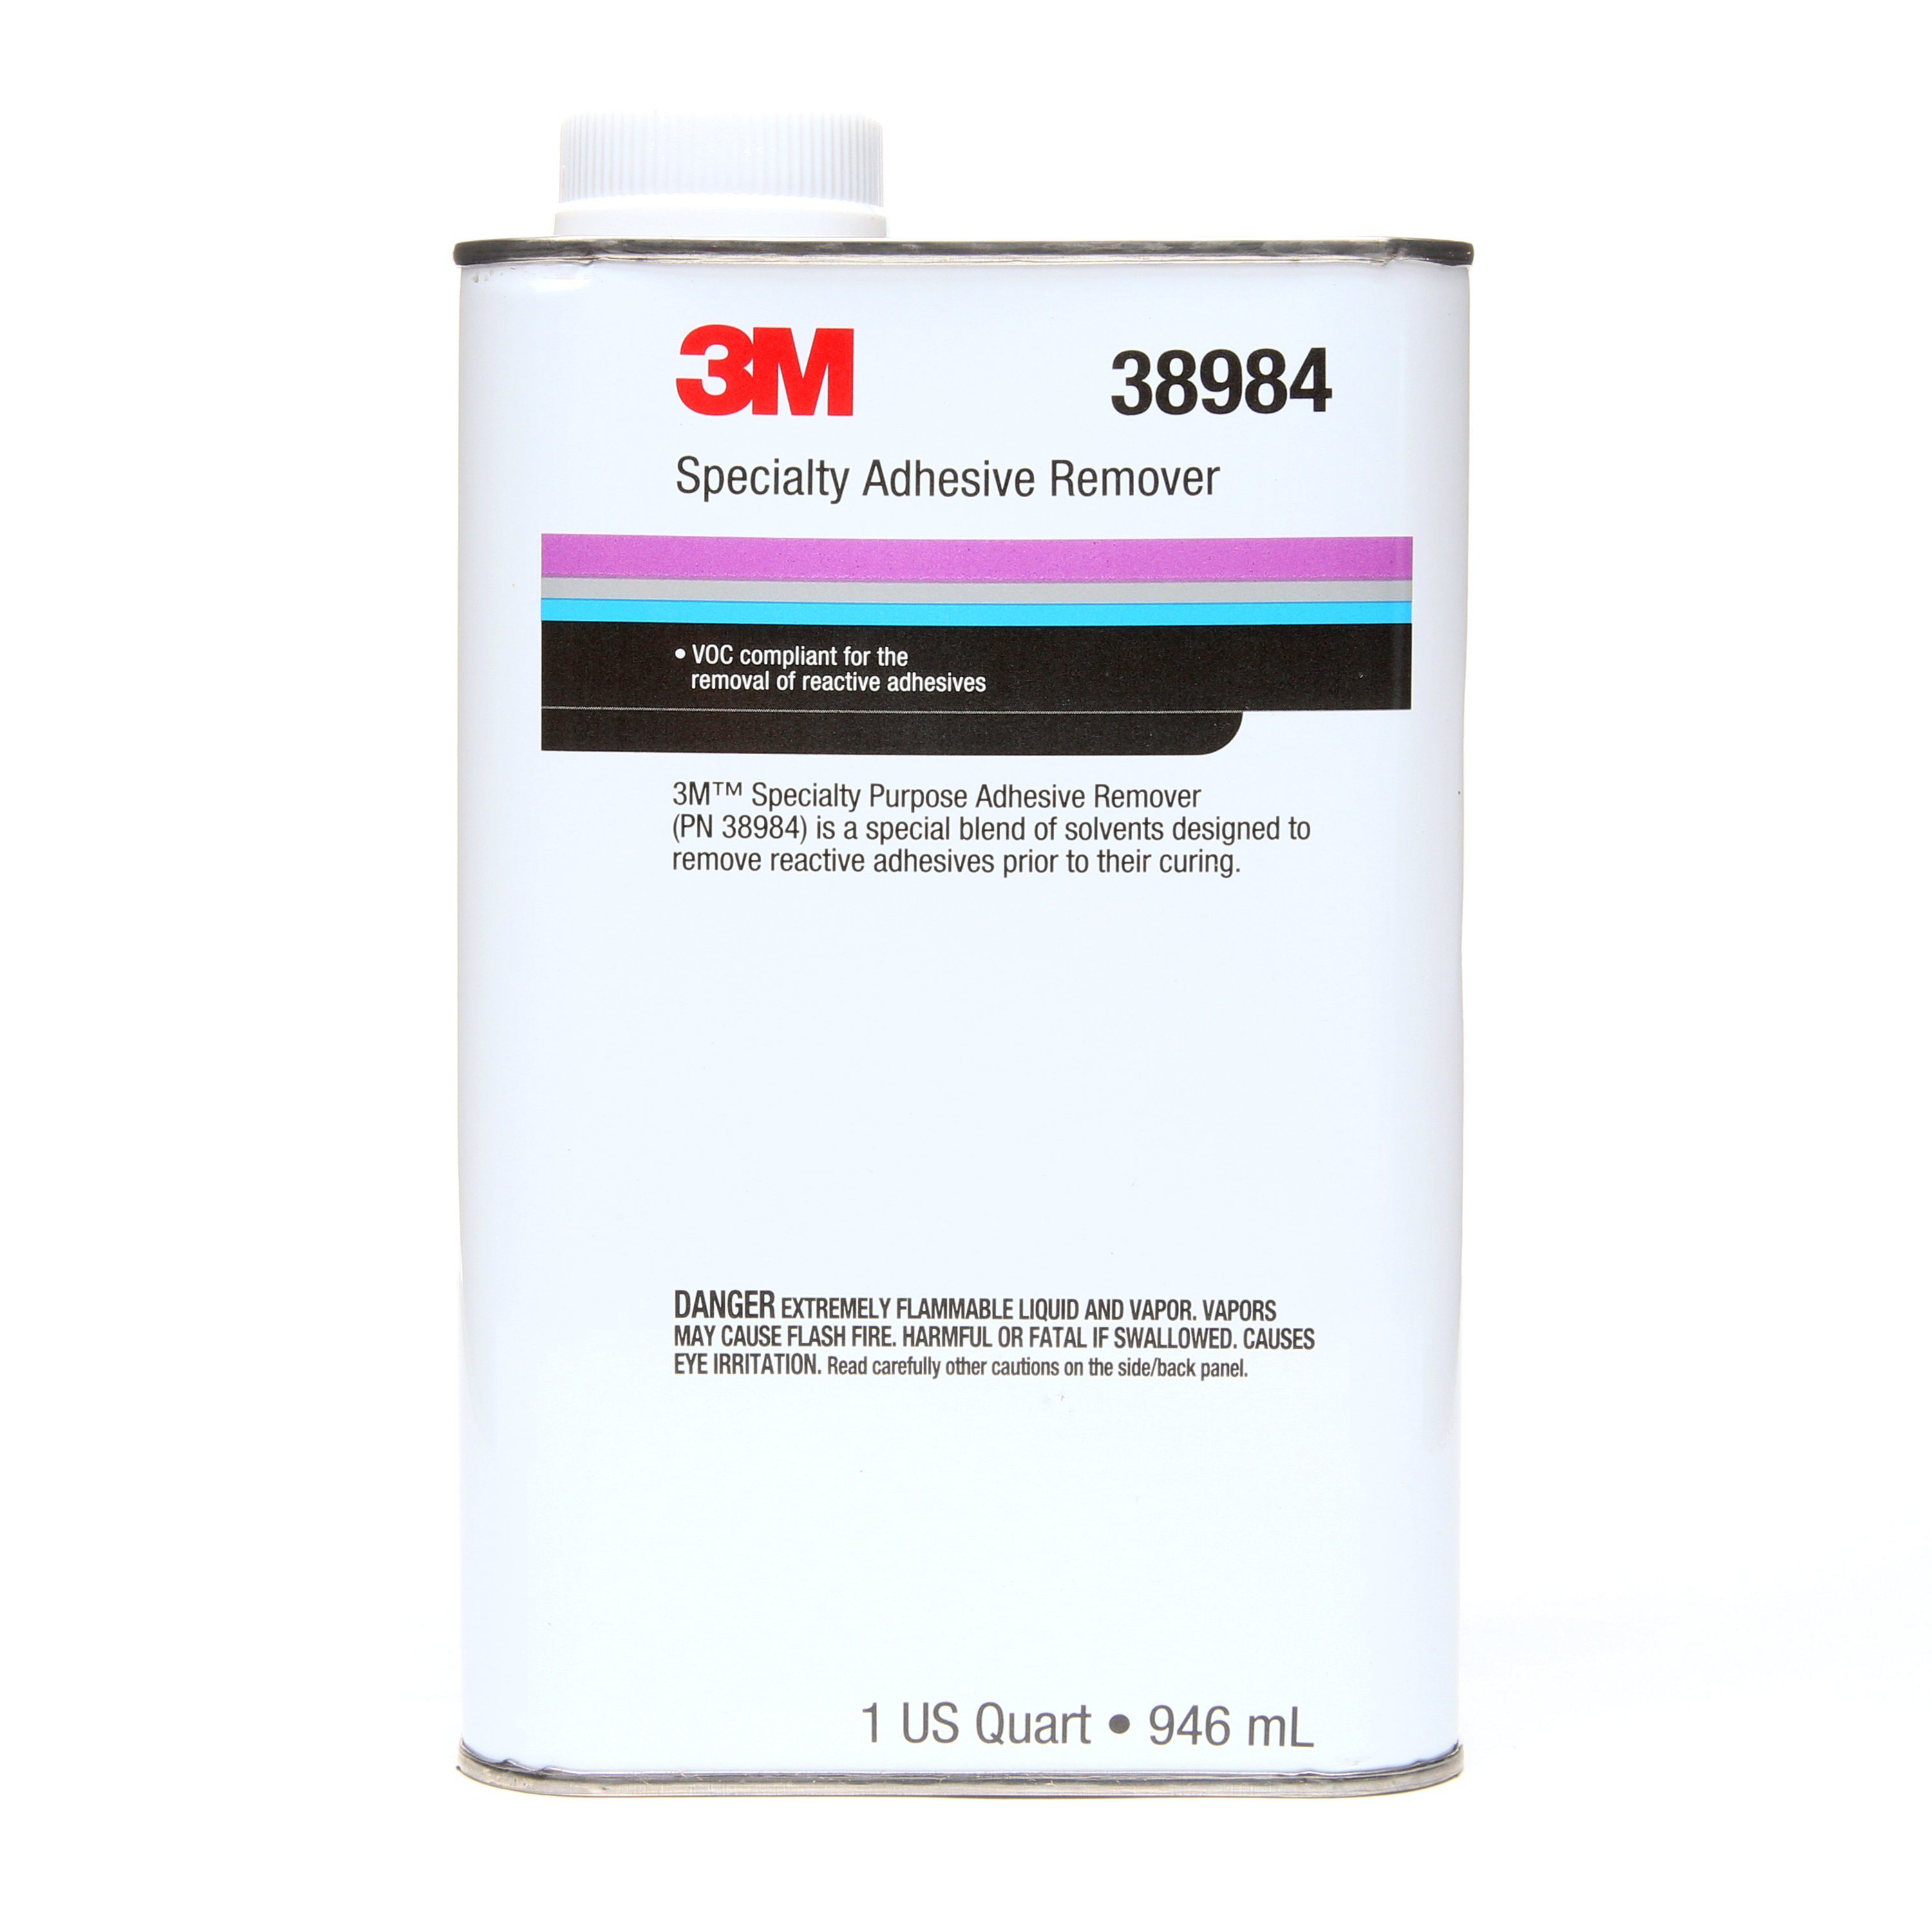 3M Specialty Adhesive Remover (389)